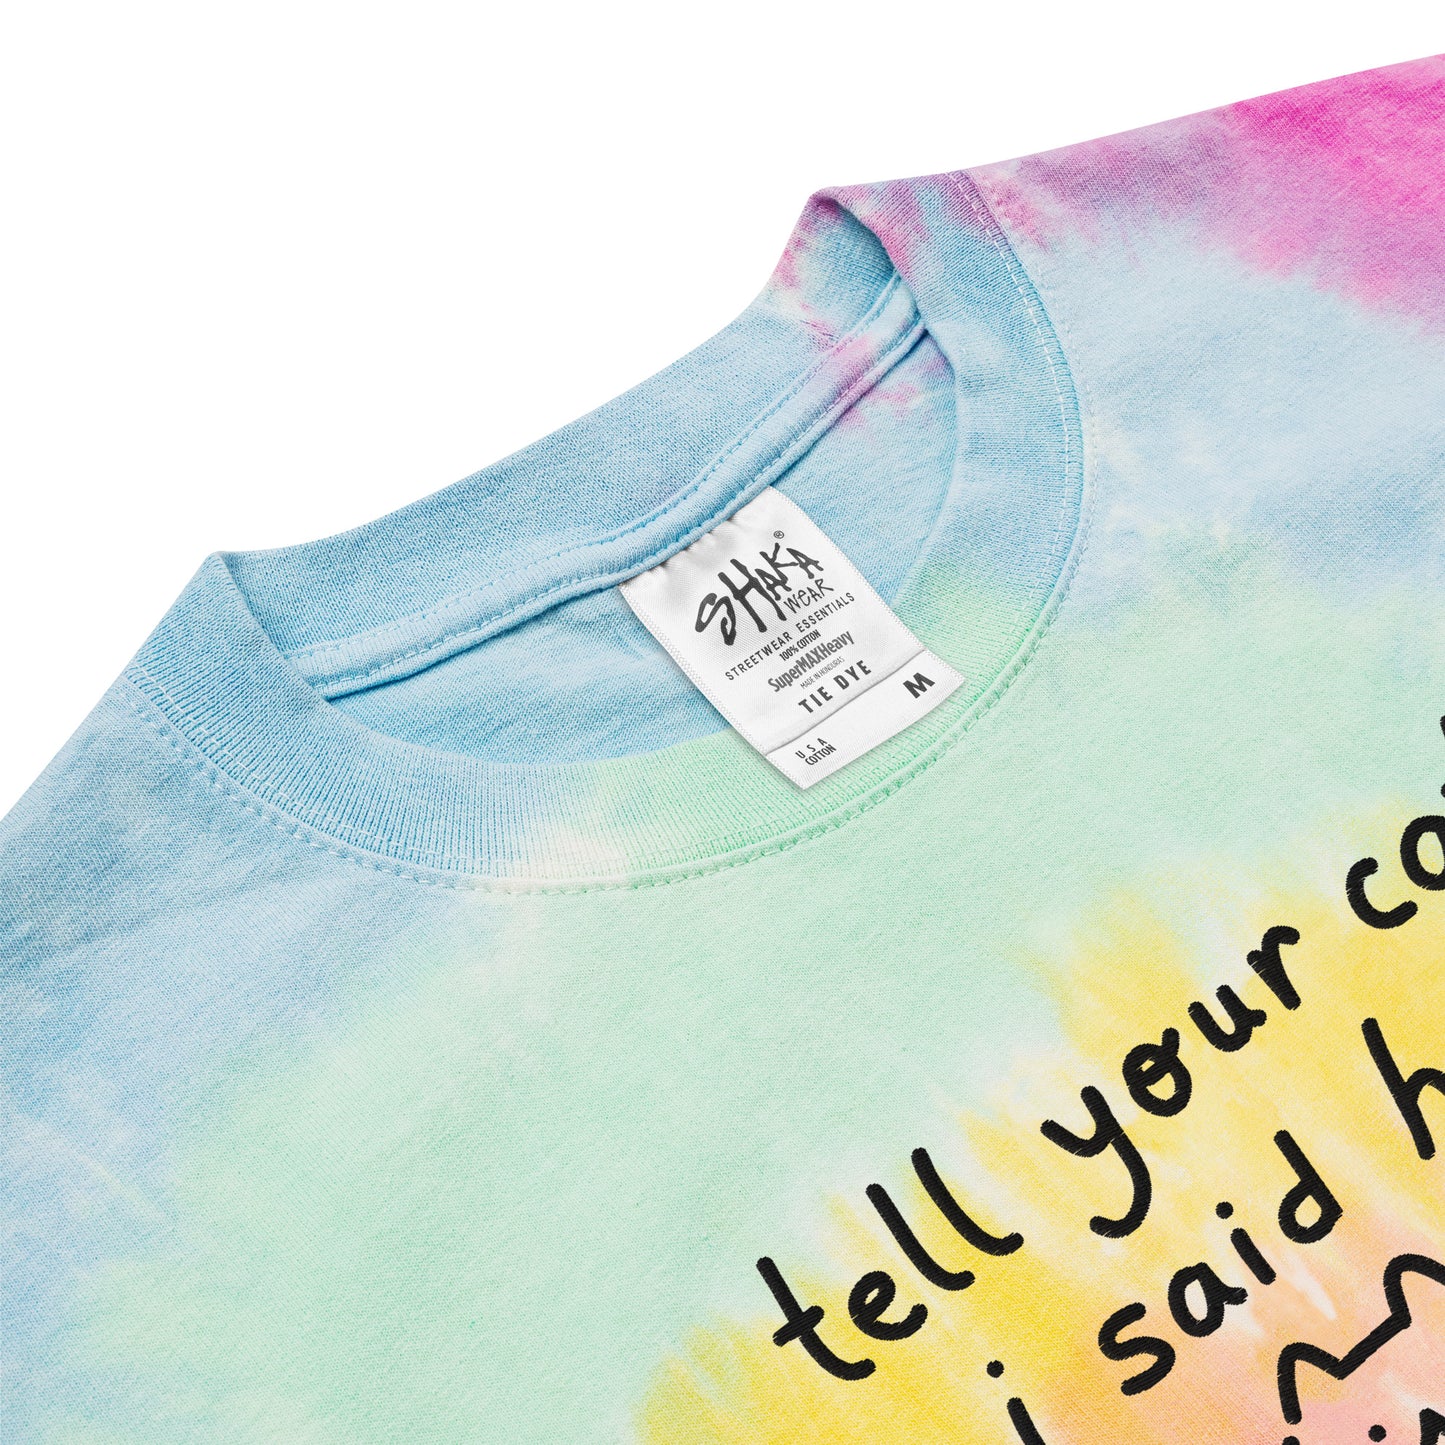 Tell your Cat I Said Hi Embroidered Oversized tie-dye t-shirt S - 2XL